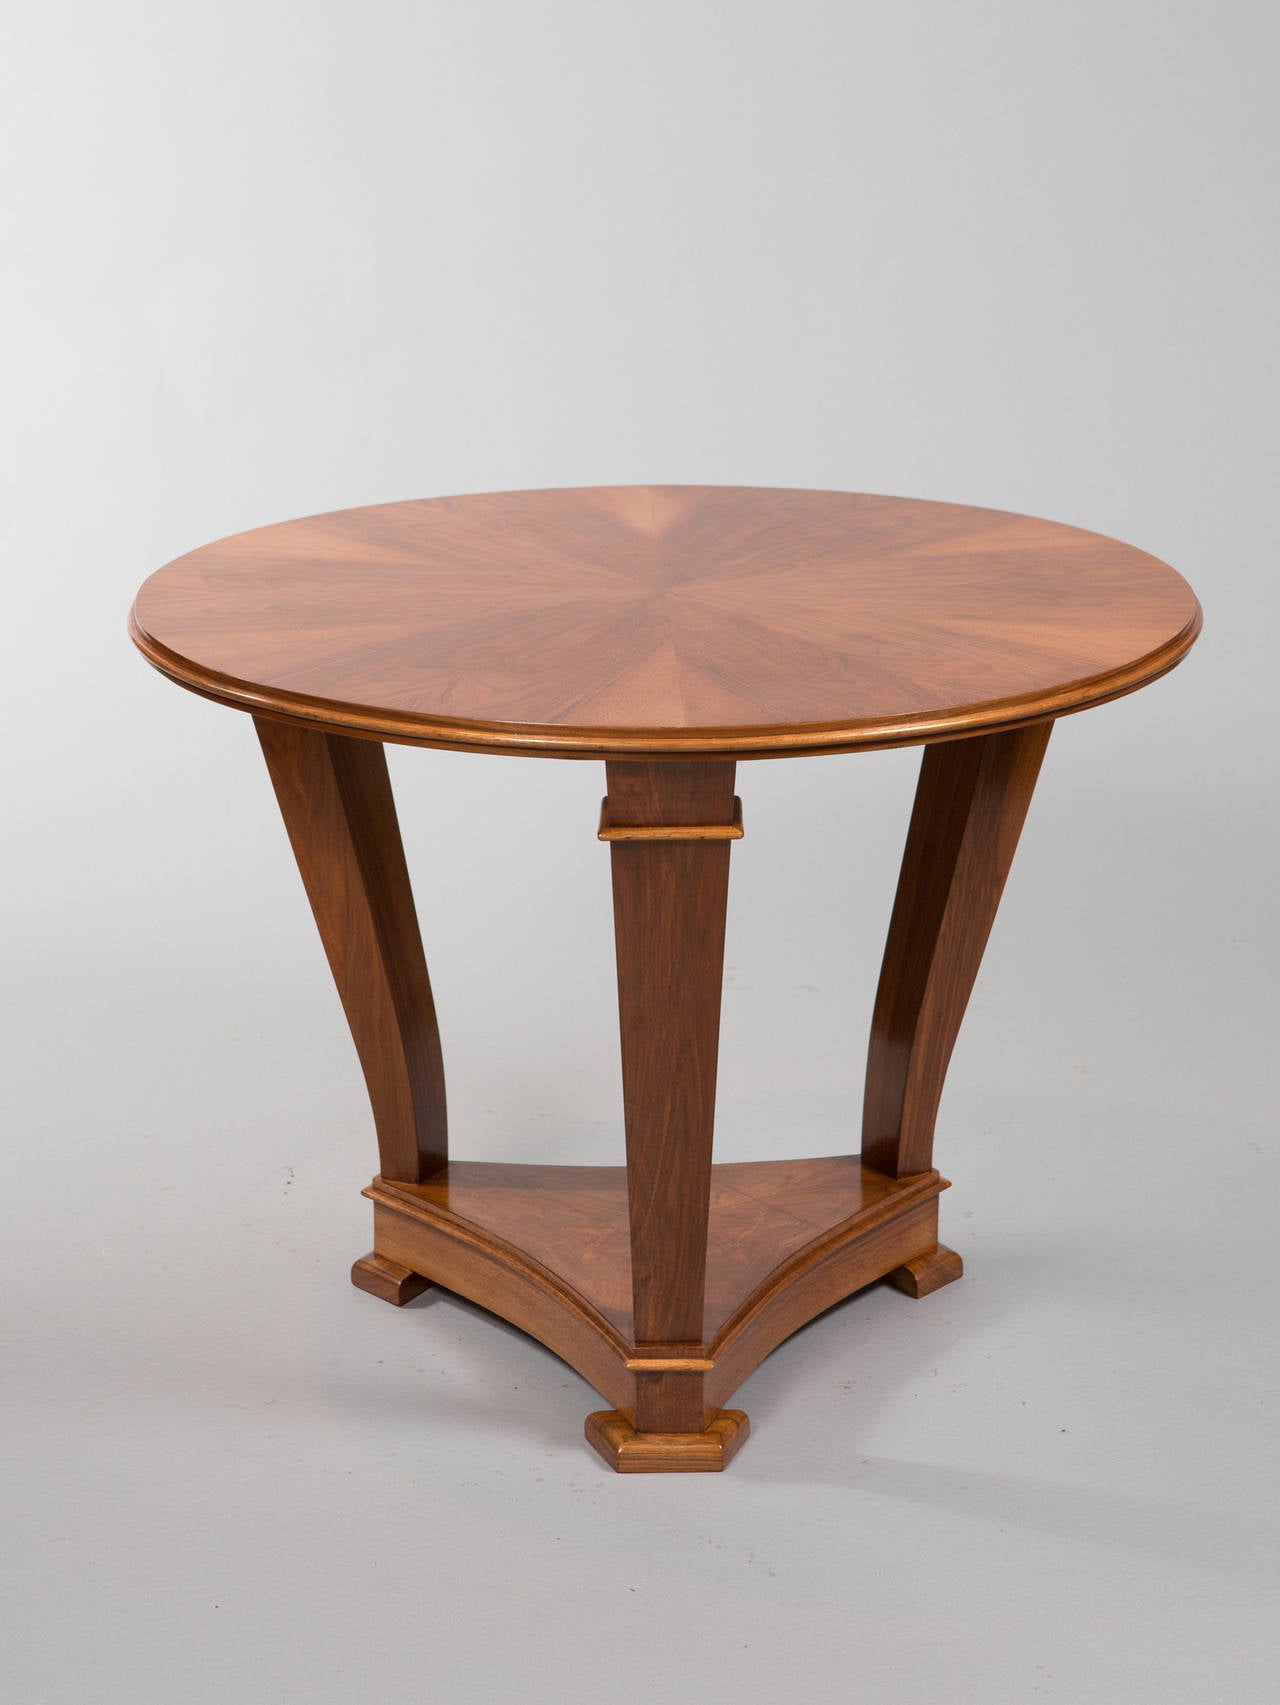 Beautiful, inlaid starburst pattern, French center table with beveled edges sitting on a raised platform. Restored.